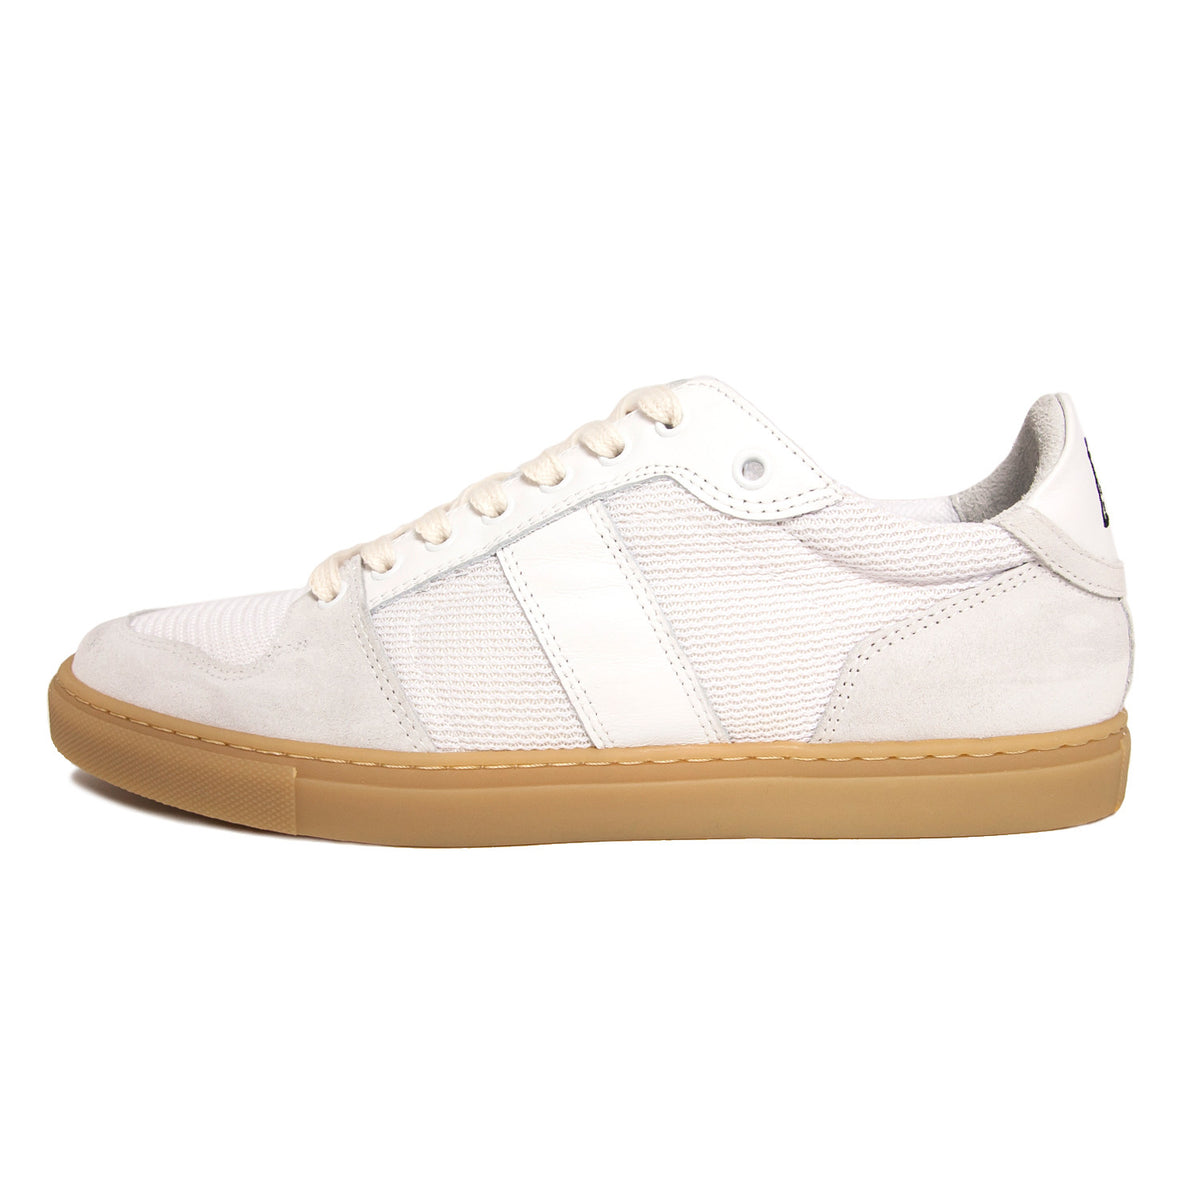 AMI - Low Top Trainers - White